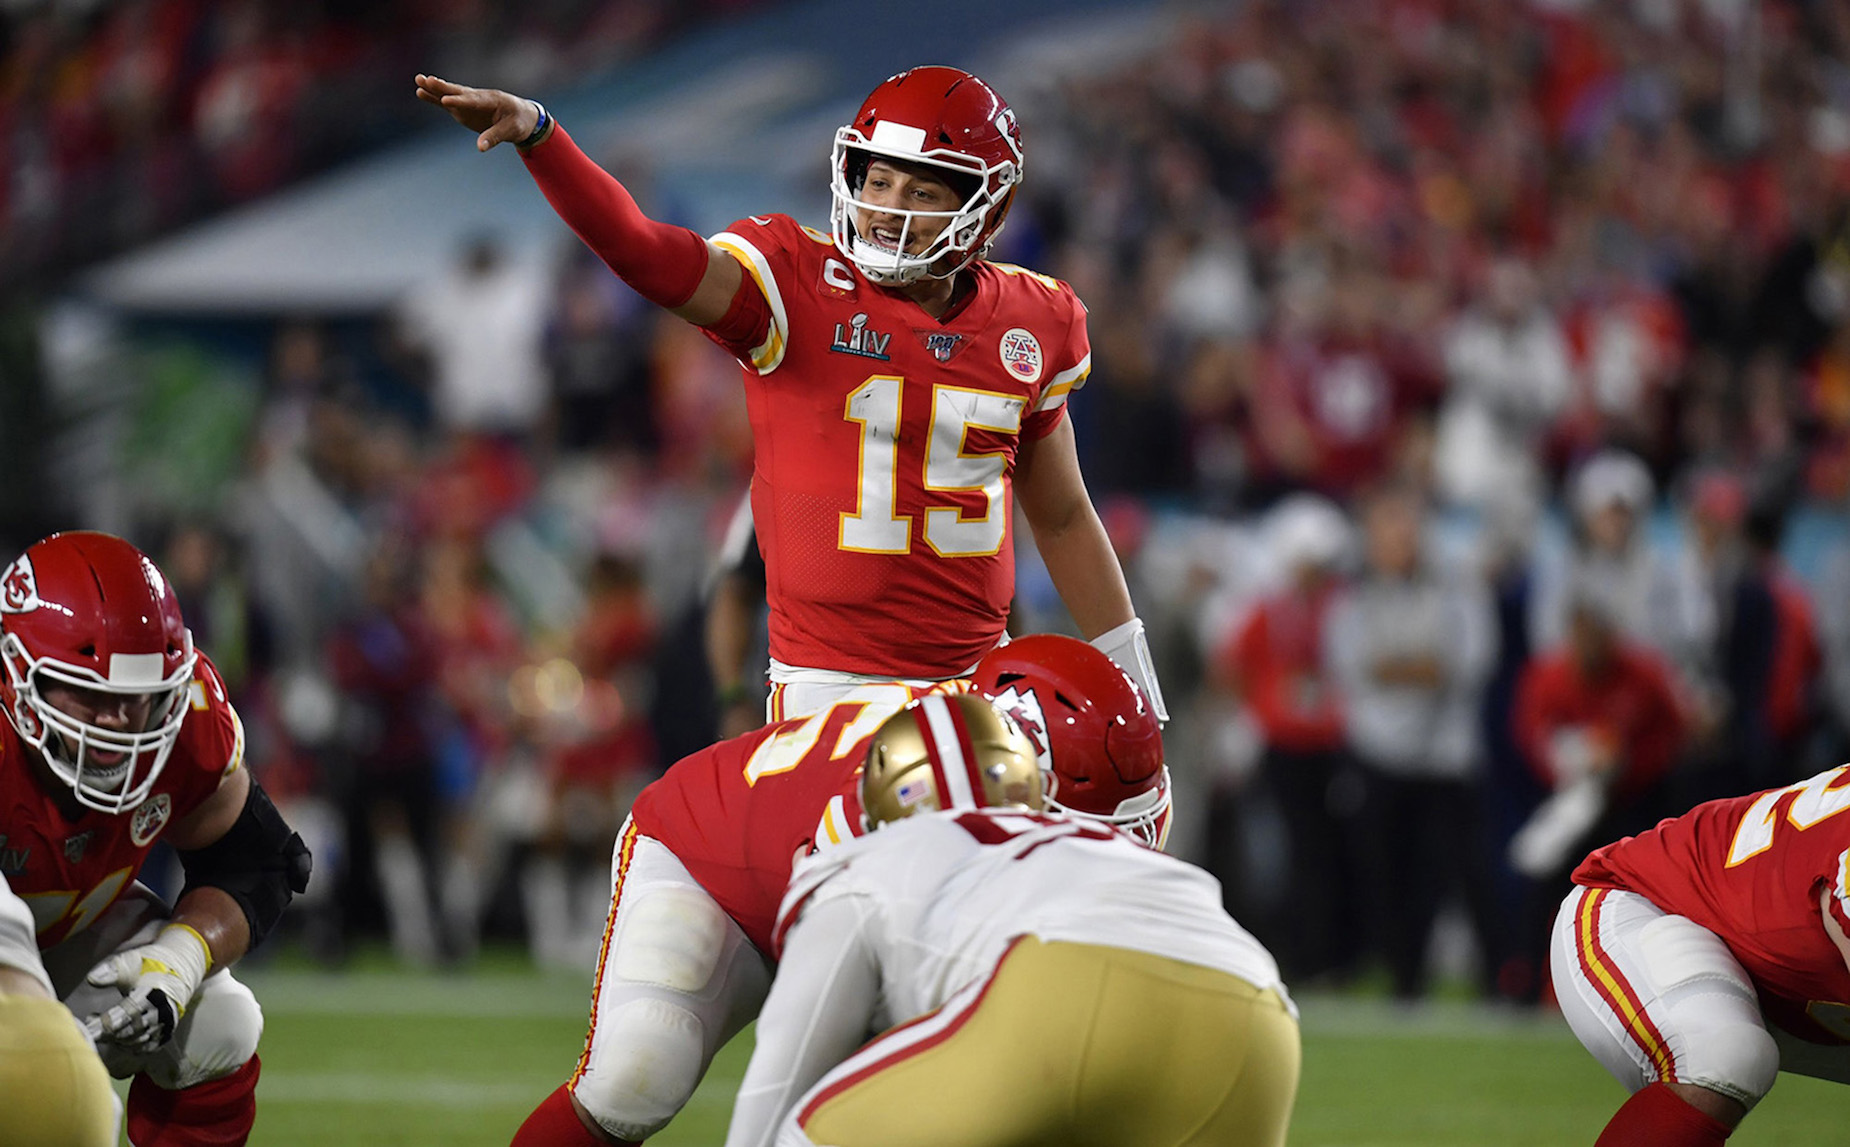 Patrick Mahomes will be following in Colin Kaepernick's footsteps and using his celebrity status for the greater good.